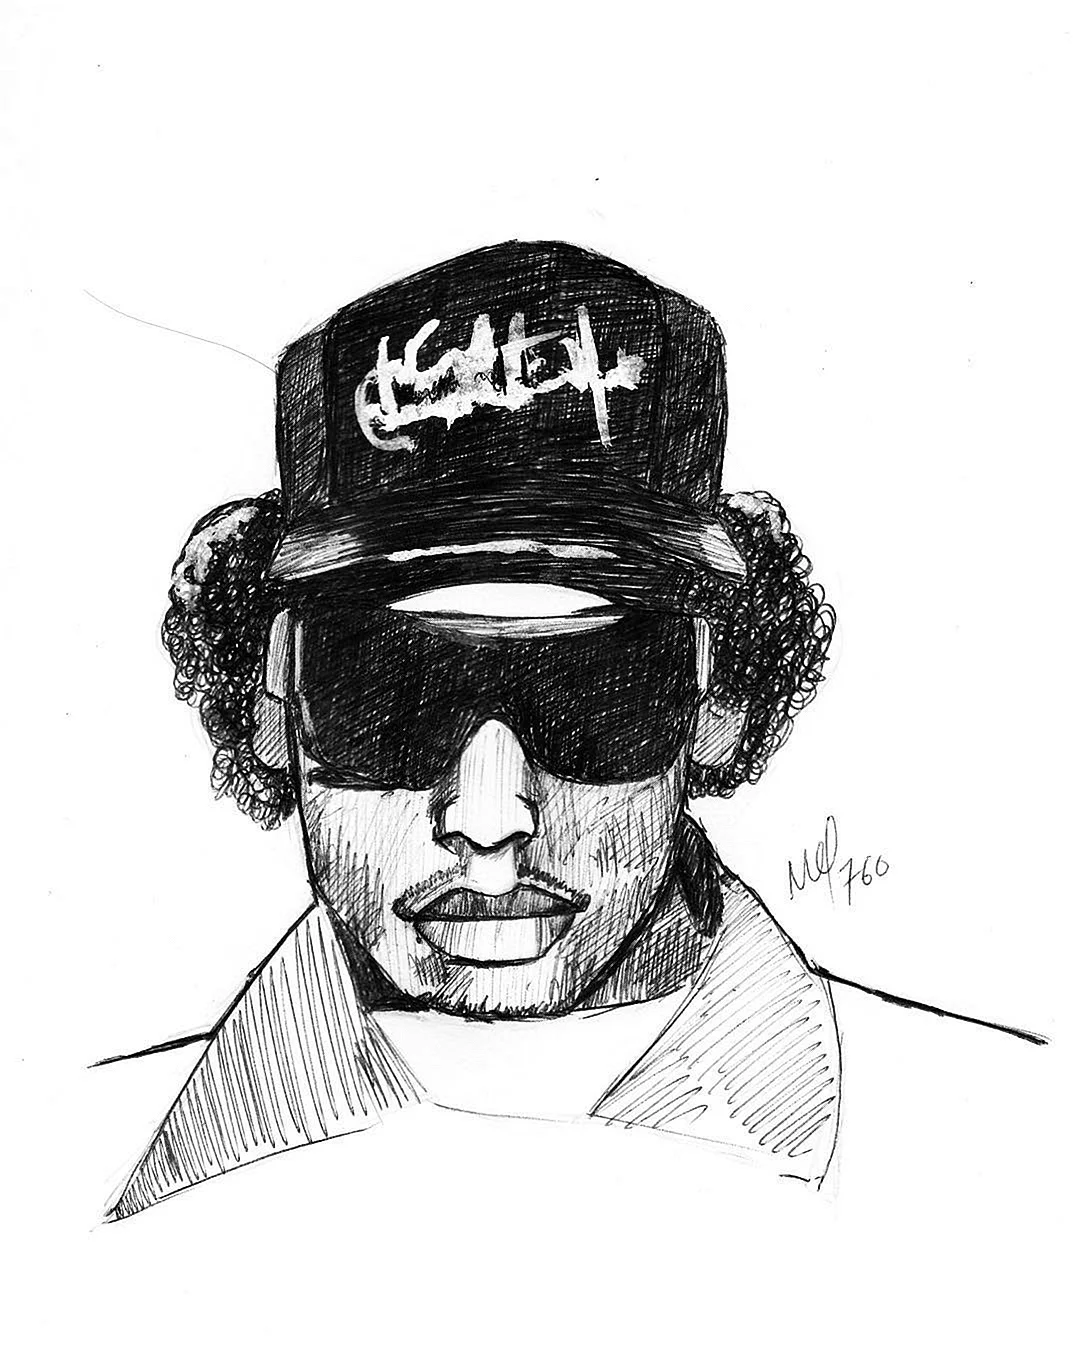 Draw Eazy E Wallpaper For iPhone